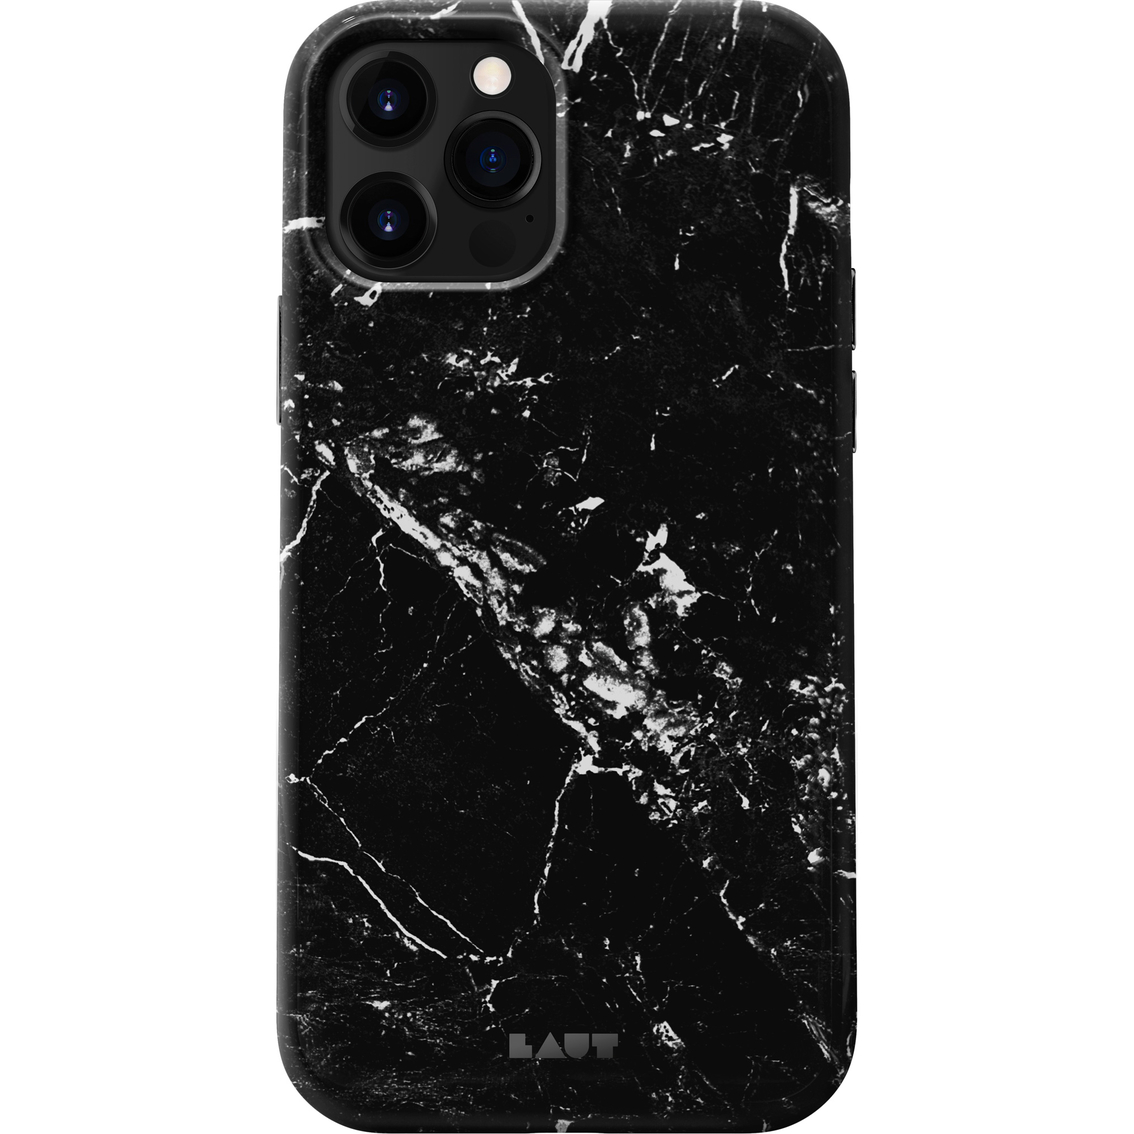 LAUT Design USA Huex Elements Case for Apple iPhone 12 Pro Max - Image 2 of 5